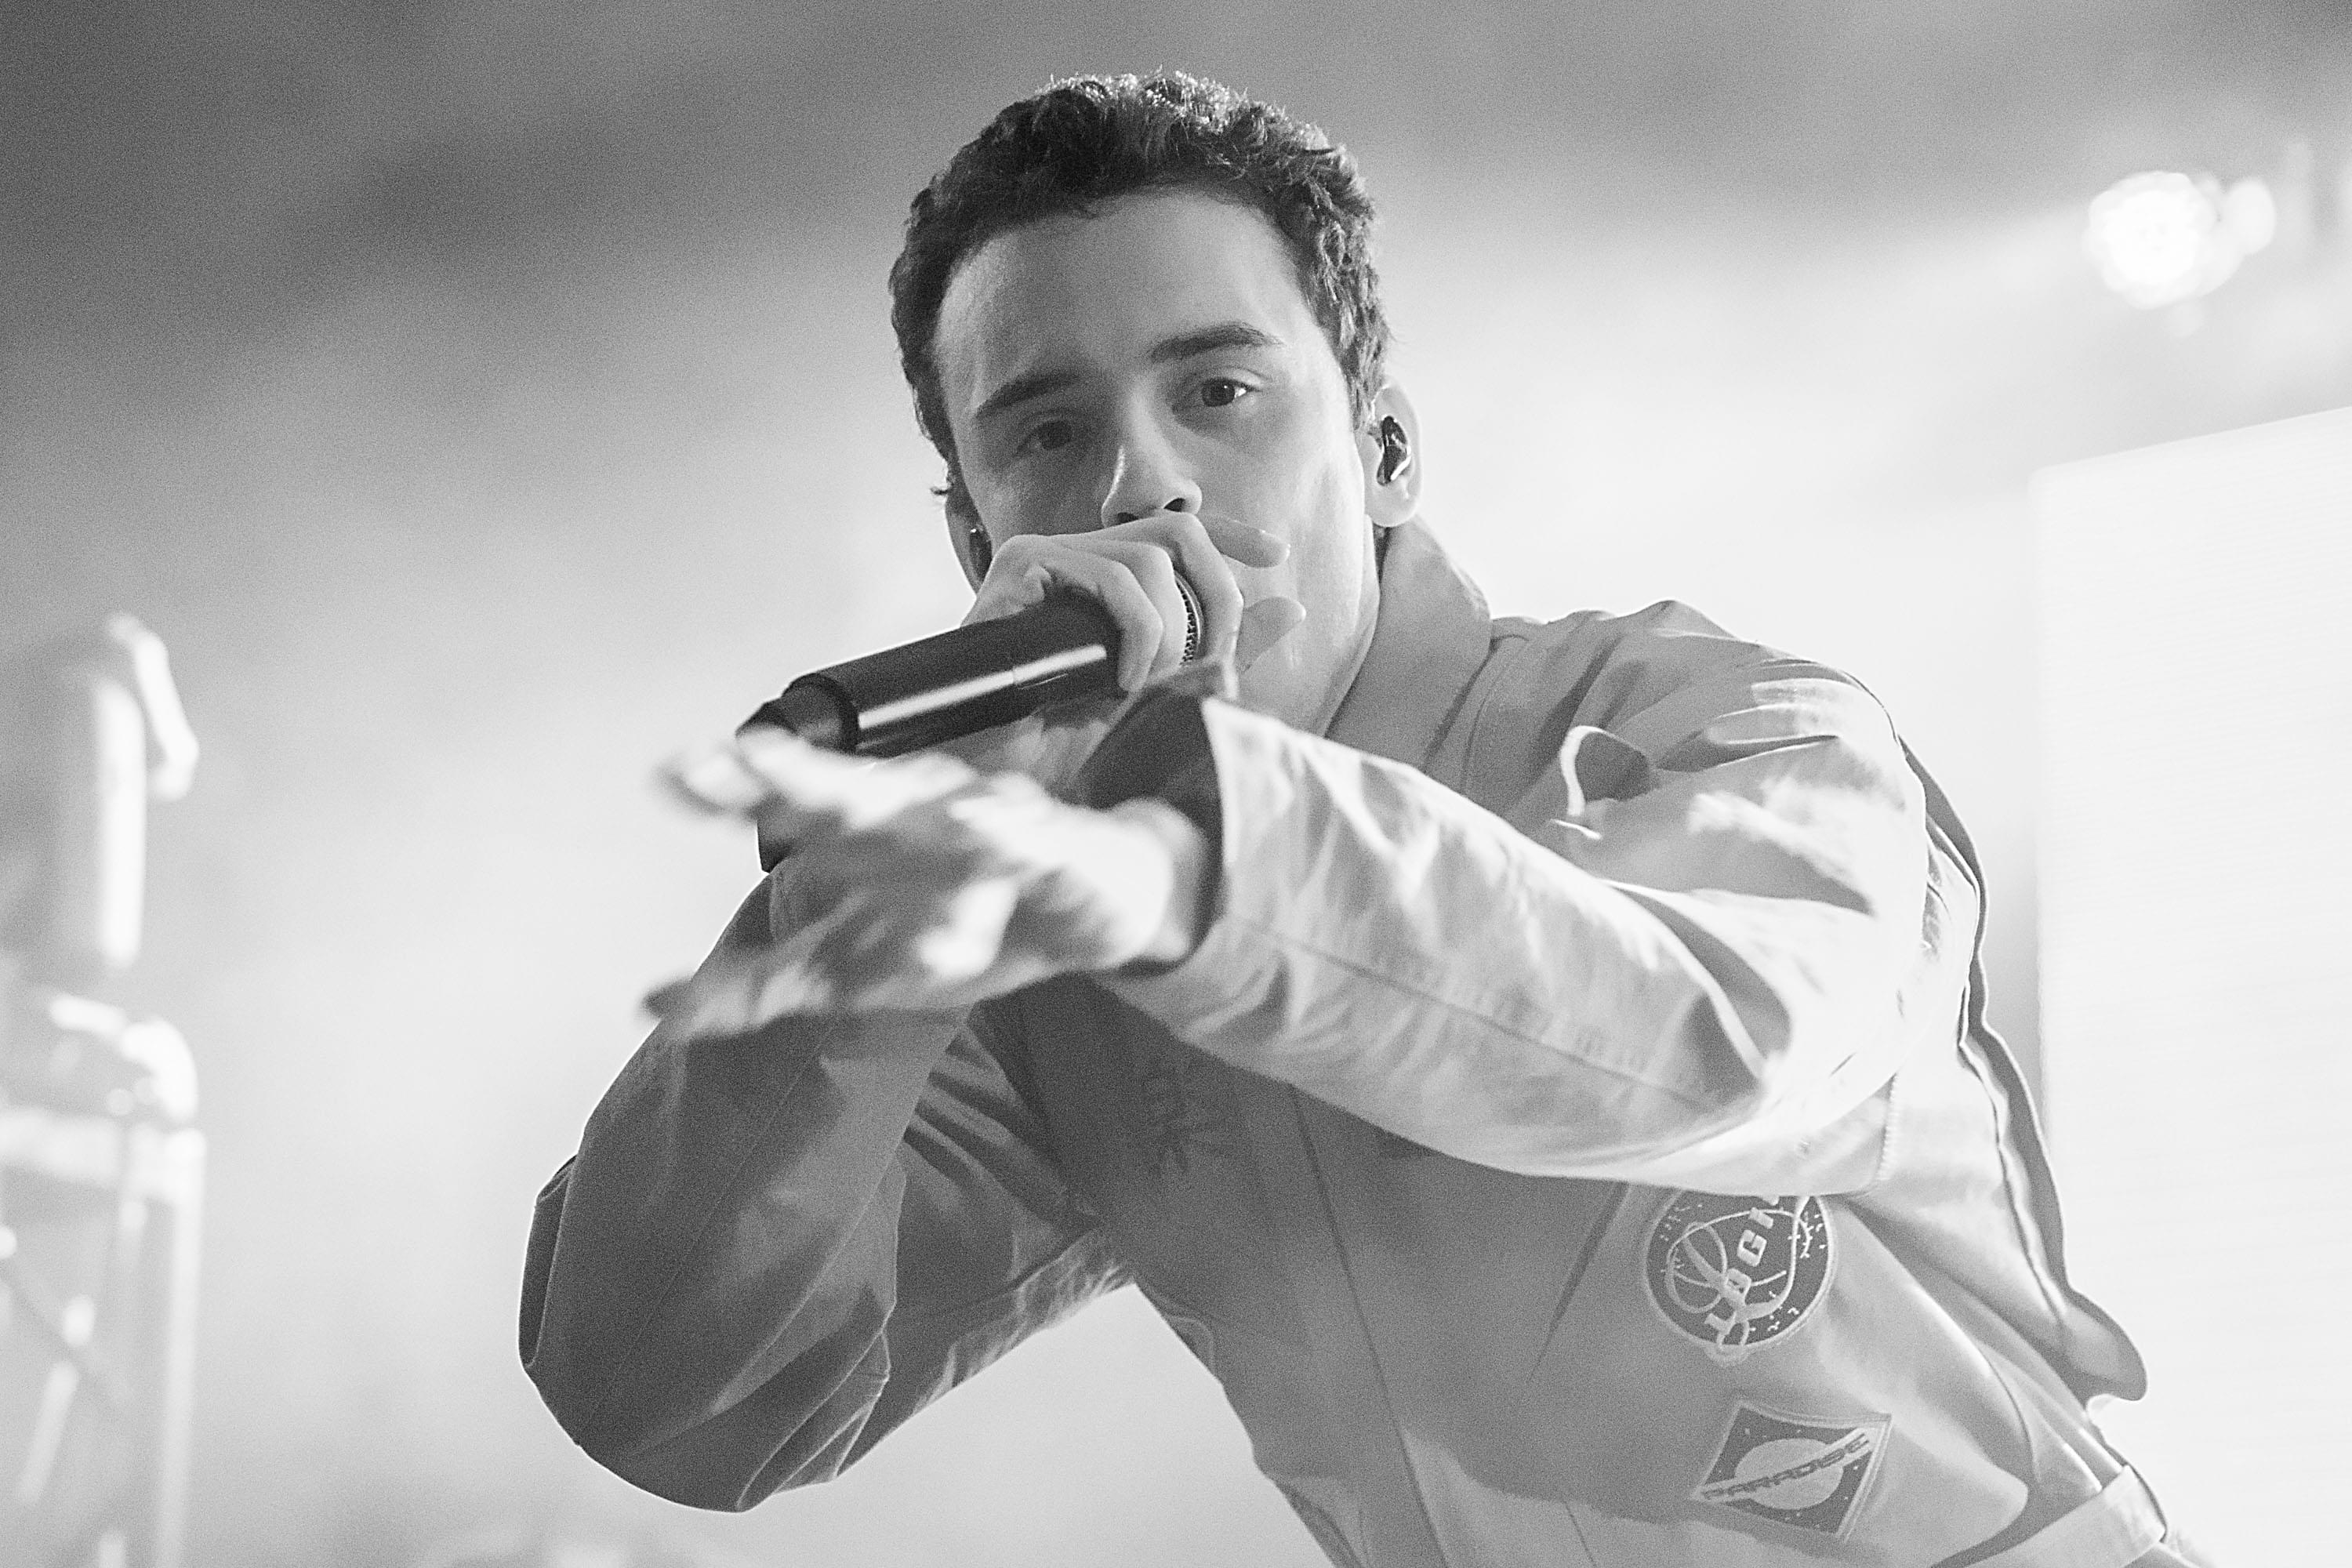 What’s Logic’s Next Move? [WATCH]